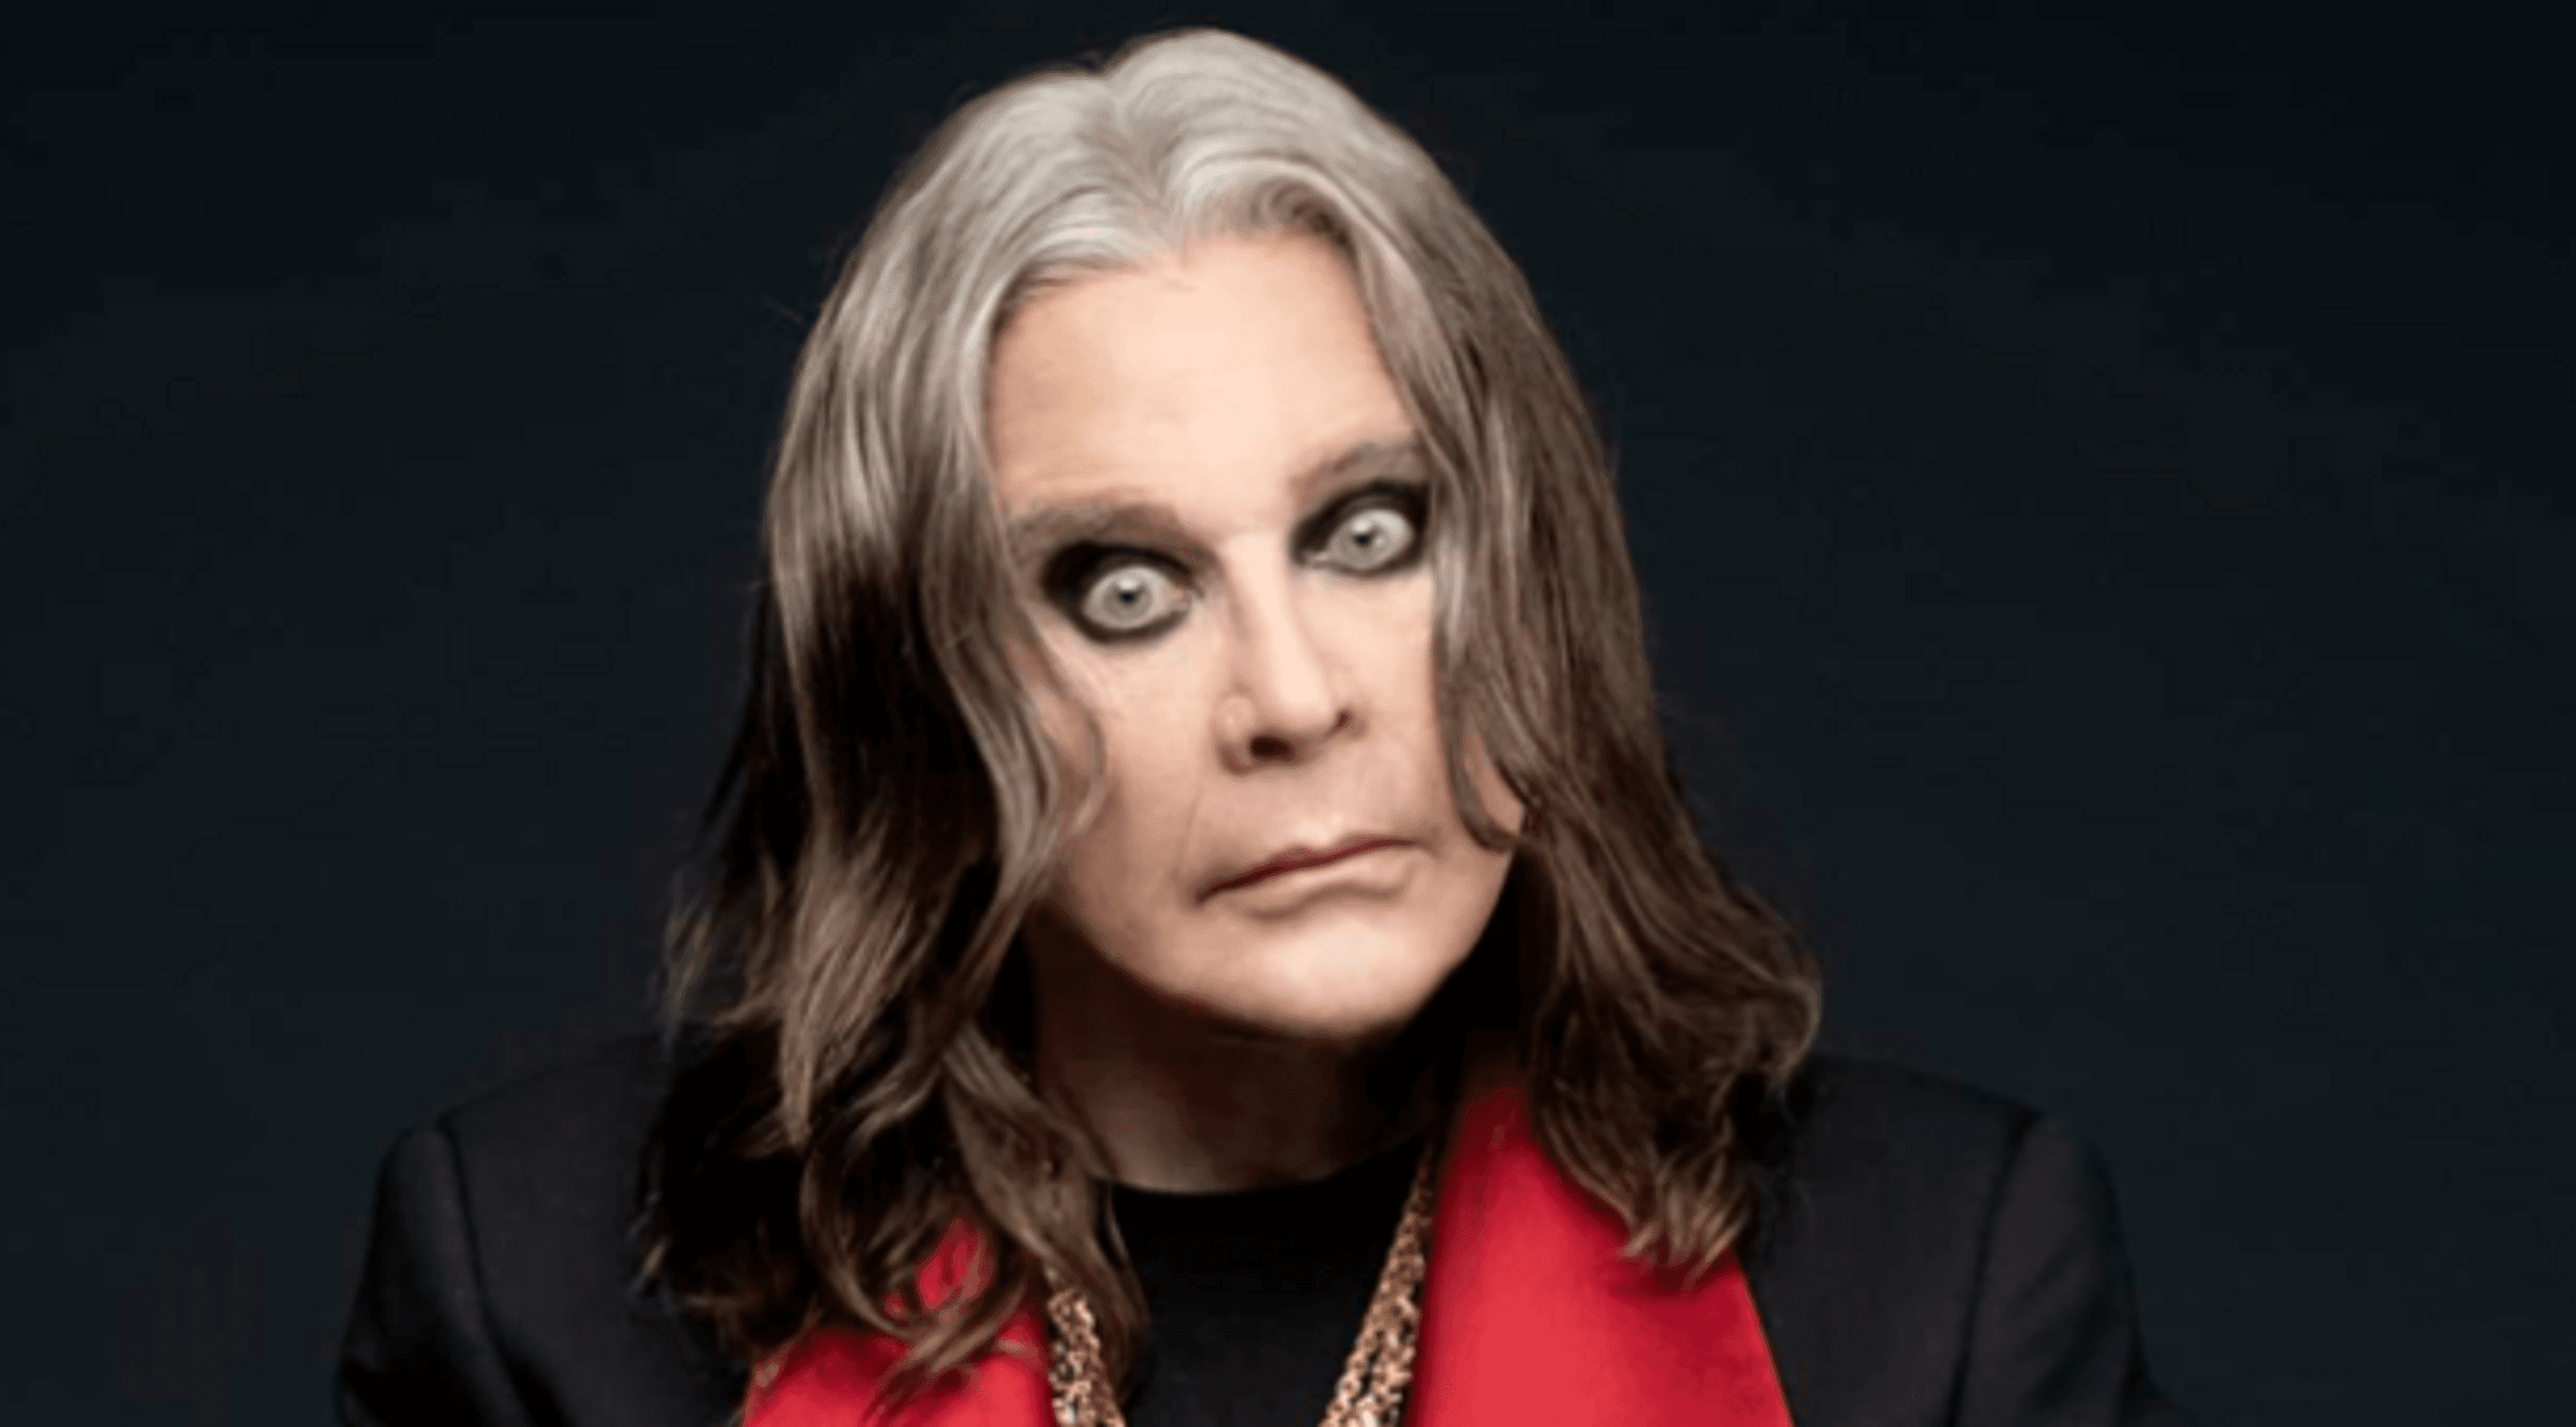 ”ozzy-osbournes-new-album-is-to-be-released-this-fall”